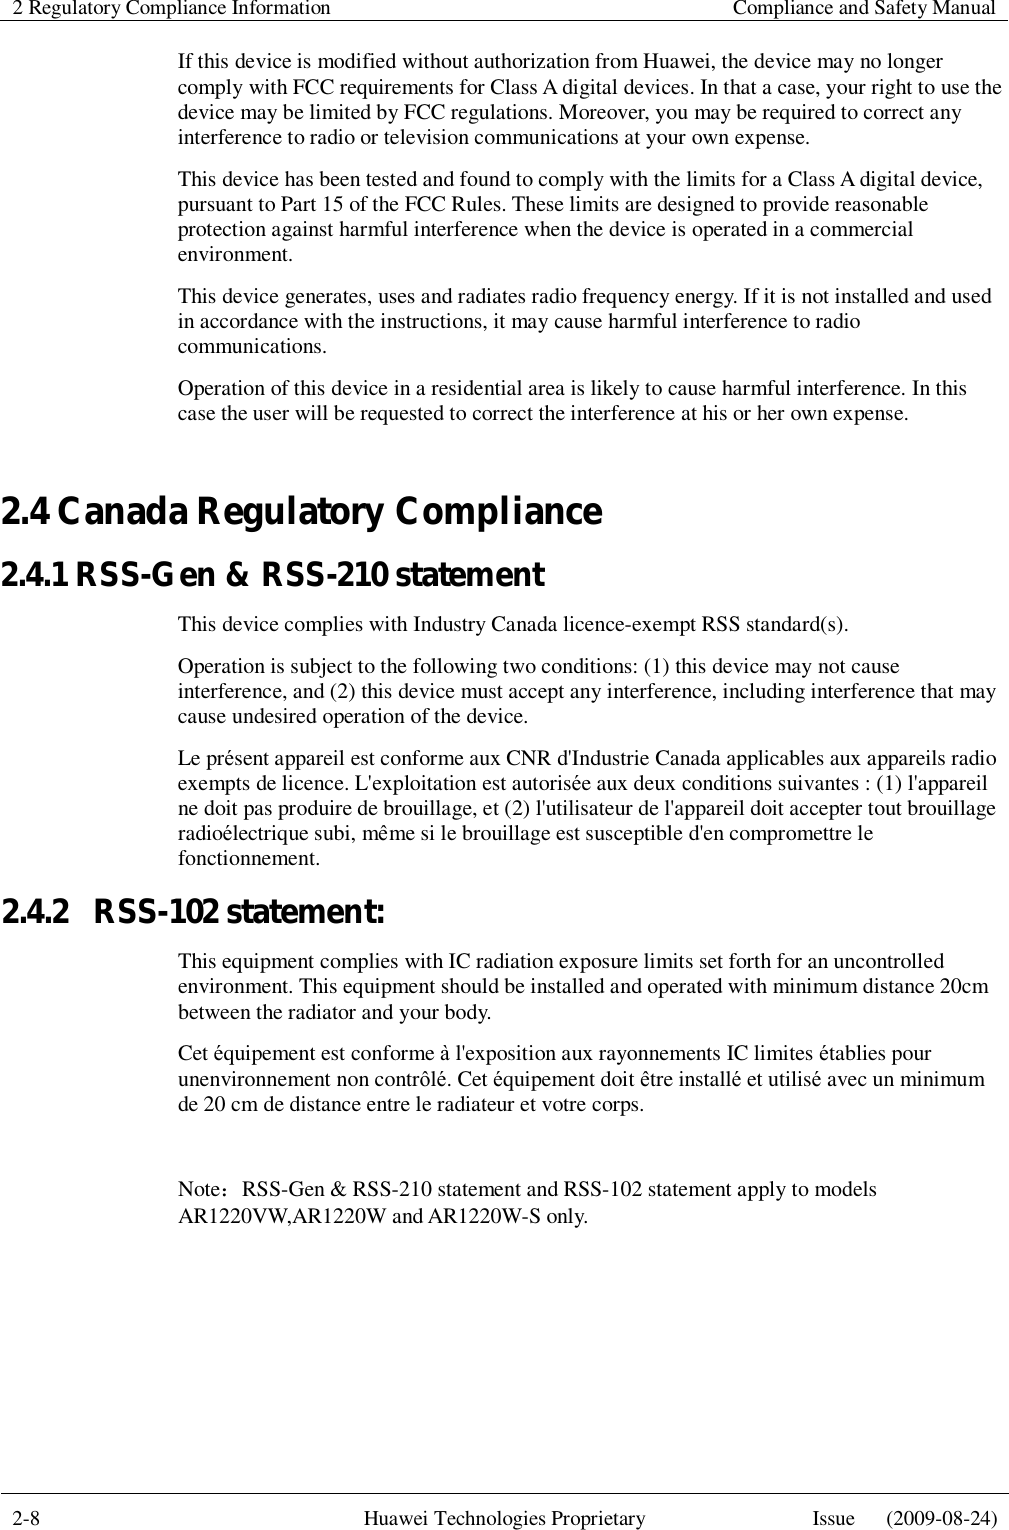 2 Regulatory Compliance Information    Compliance and Safety Manual  2-8  Huawei Technologies Proprietary  Issue   (2009-08-24)  If this device is modified without authorization from Huawei, the device may no longer comply with FCC requirements for Class A digital devices. In that a case, your right to use the device may be limited by FCC regulations. Moreover, you may be required to correct any interference to radio or television communications at your own expense. This device has been tested and found to comply with the limits for a Class A digital device, pursuant to Part 15 of the FCC Rules. These limits are designed to provide reasonable protection against harmful interference when the device is operated in a commercial environment. This device generates, uses and radiates radio frequency energy. If it is not installed and used in accordance with the instructions, it may cause harmful interference to radio communications. Operation of this device in a residential area is likely to cause harmful interference. In this case the user will be requested to correct the interference at his or her own expense. 2.4 Canada Regulatory Compliance 2.4.1 RSS-Gen &amp; RSS-210 statement This device complies with Industry Canada licence-exempt RSS standard(s). Operation is subject to the following two conditions: (1) this device may not cause interference, and (2) this device must accept any interference, including interference that may cause undesired operation of the device. Le présent appareil est conforme aux CNR d&apos;Industrie Canada applicables aux appareils radio exempts de licence. L&apos;exploitation est autorisée aux deux conditions suivantes : (1) l&apos;appareil ne doit pas produire de brouillage, et (2) l&apos;utilisateur de l&apos;appareil doit accepter tout brouillage radioélectrique subi, même si le brouillage est susceptible d&apos;en compromettre le fonctionnement. 2.4.2  RSS-102 statement: This equipment complies with IC radiation exposure limits set forth for an uncontrolled environment. This equipment should be installed and operated with minimum distance 20cm between the radiator and your body. Cet équipement est conforme à l&apos;exposition aux rayonnements IC limites établies pour unenvironnement non contrôlé. Cet équipement doit être installé et utilisé avec un minimum de 20 cm de distance entre le radiateur et votre corps.  Note：RSS-Gen &amp; RSS-210 statement and RSS-102 statement apply to models AR1220VW,AR1220W and AR1220W-S only. 